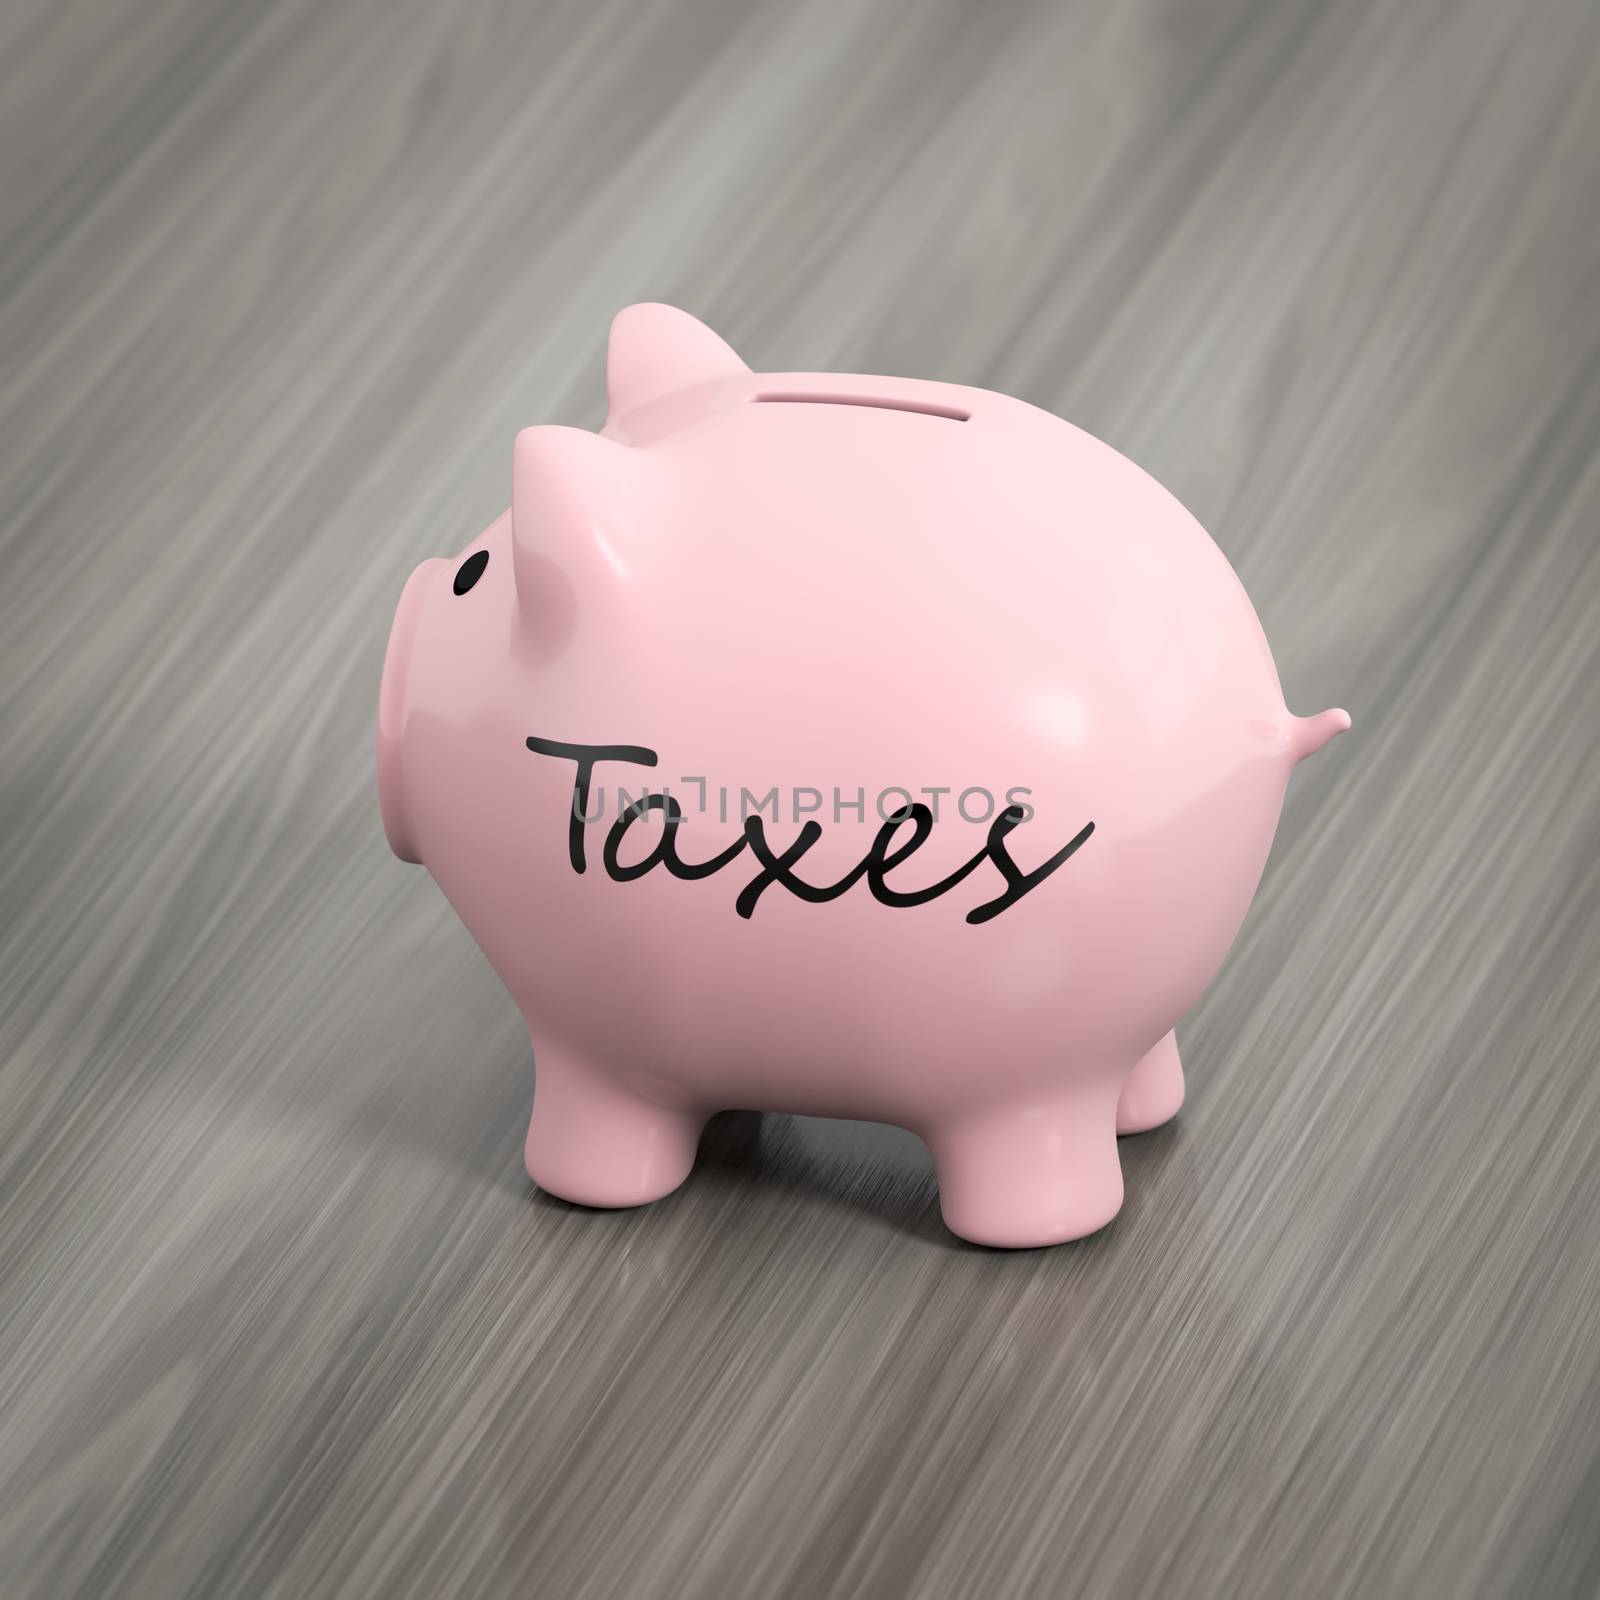 3d rendering of a pink piggy bank with the word taxes